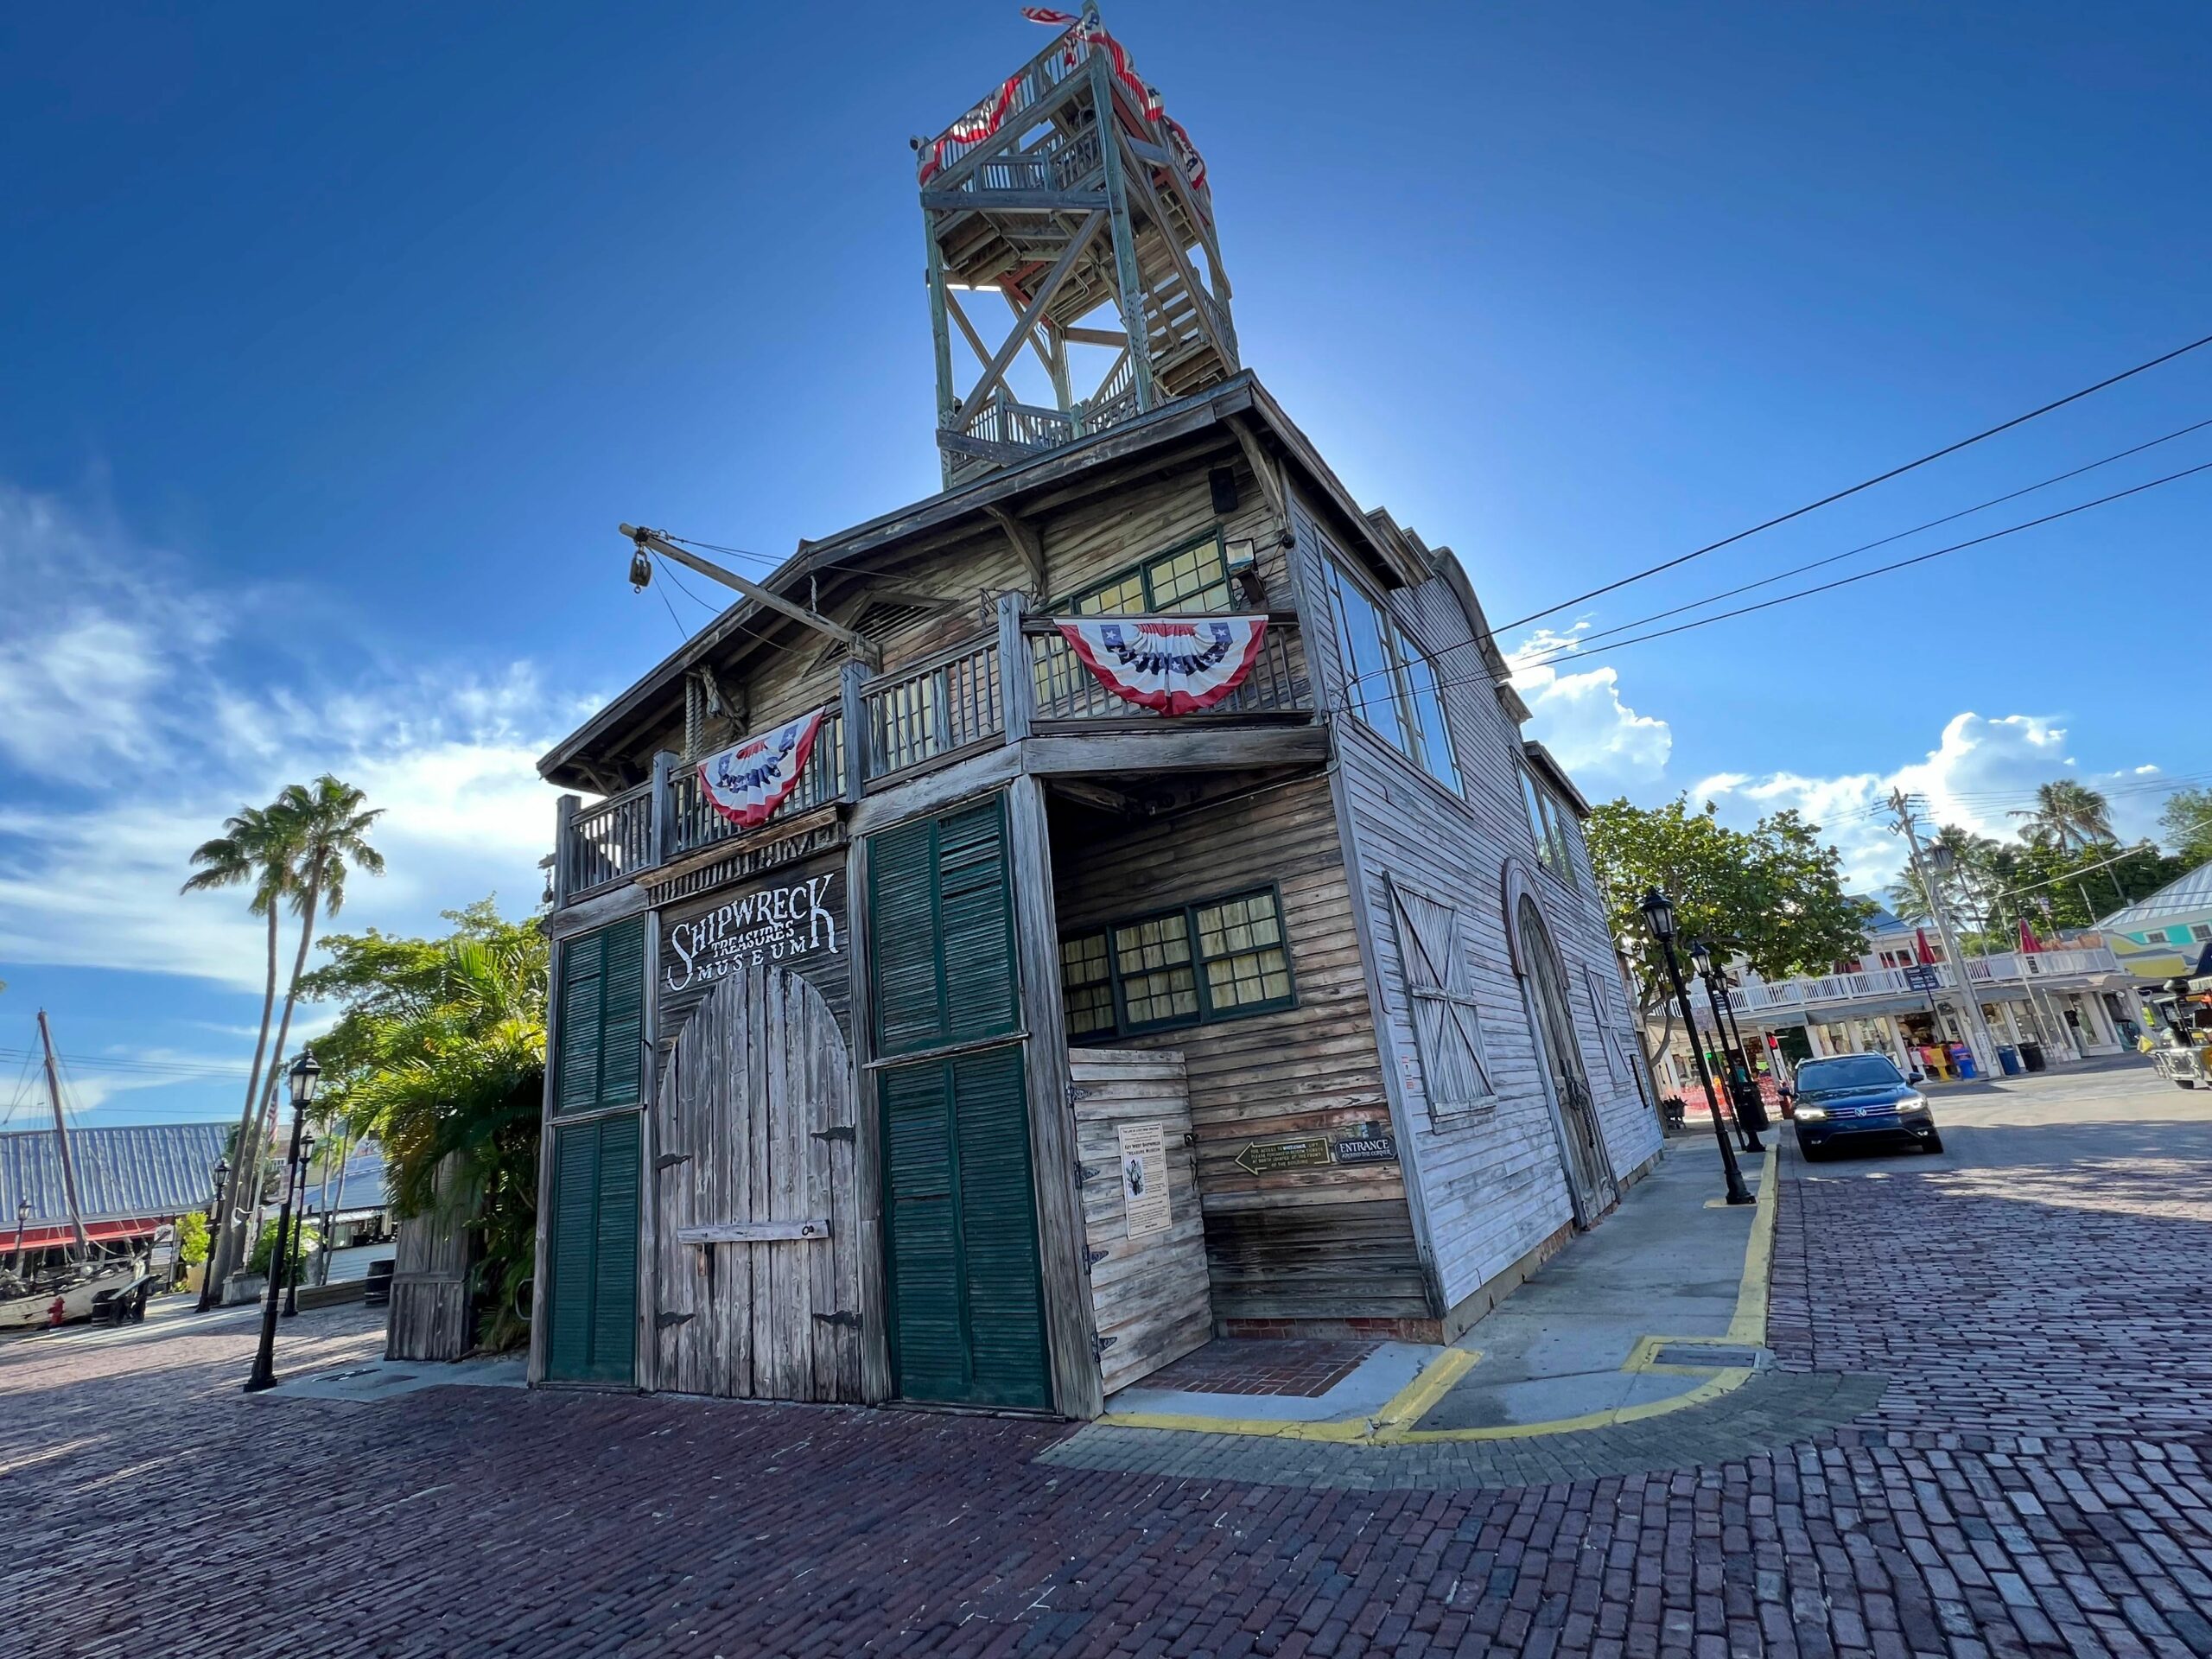 The Shipwreck Museum of Key West tells the tales of the city's "Wreckers" in its pioneer days. Photo by Bill Kress.